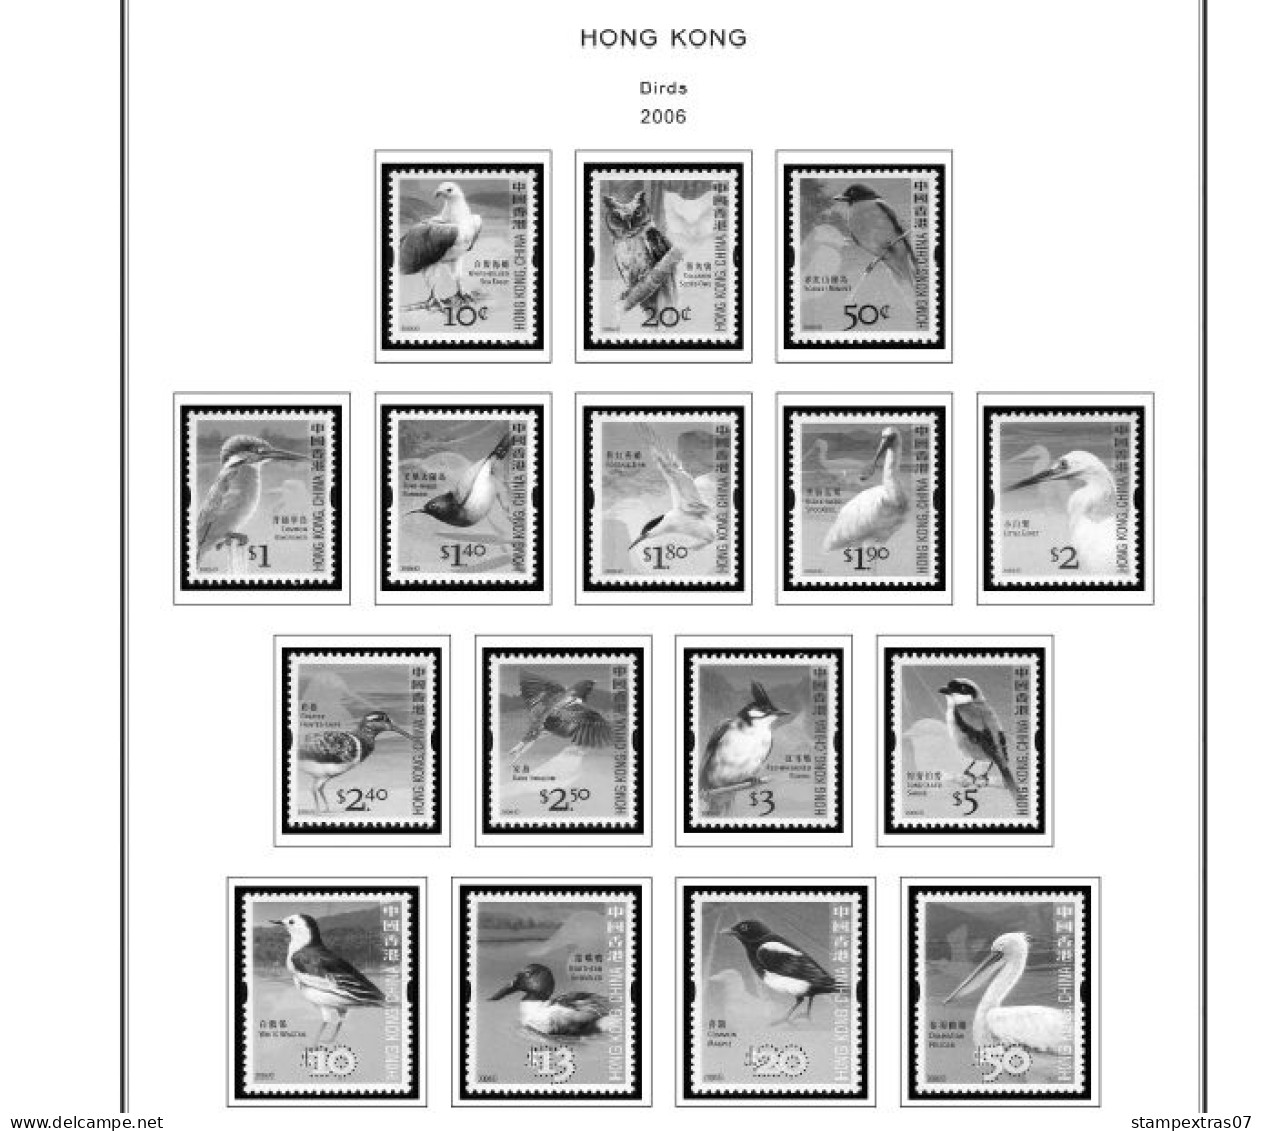 HONG KONG [SAR] 1998-2010 + 2011-2020 STAMP ALBUM PAGES (309 b&w illustrated pages)